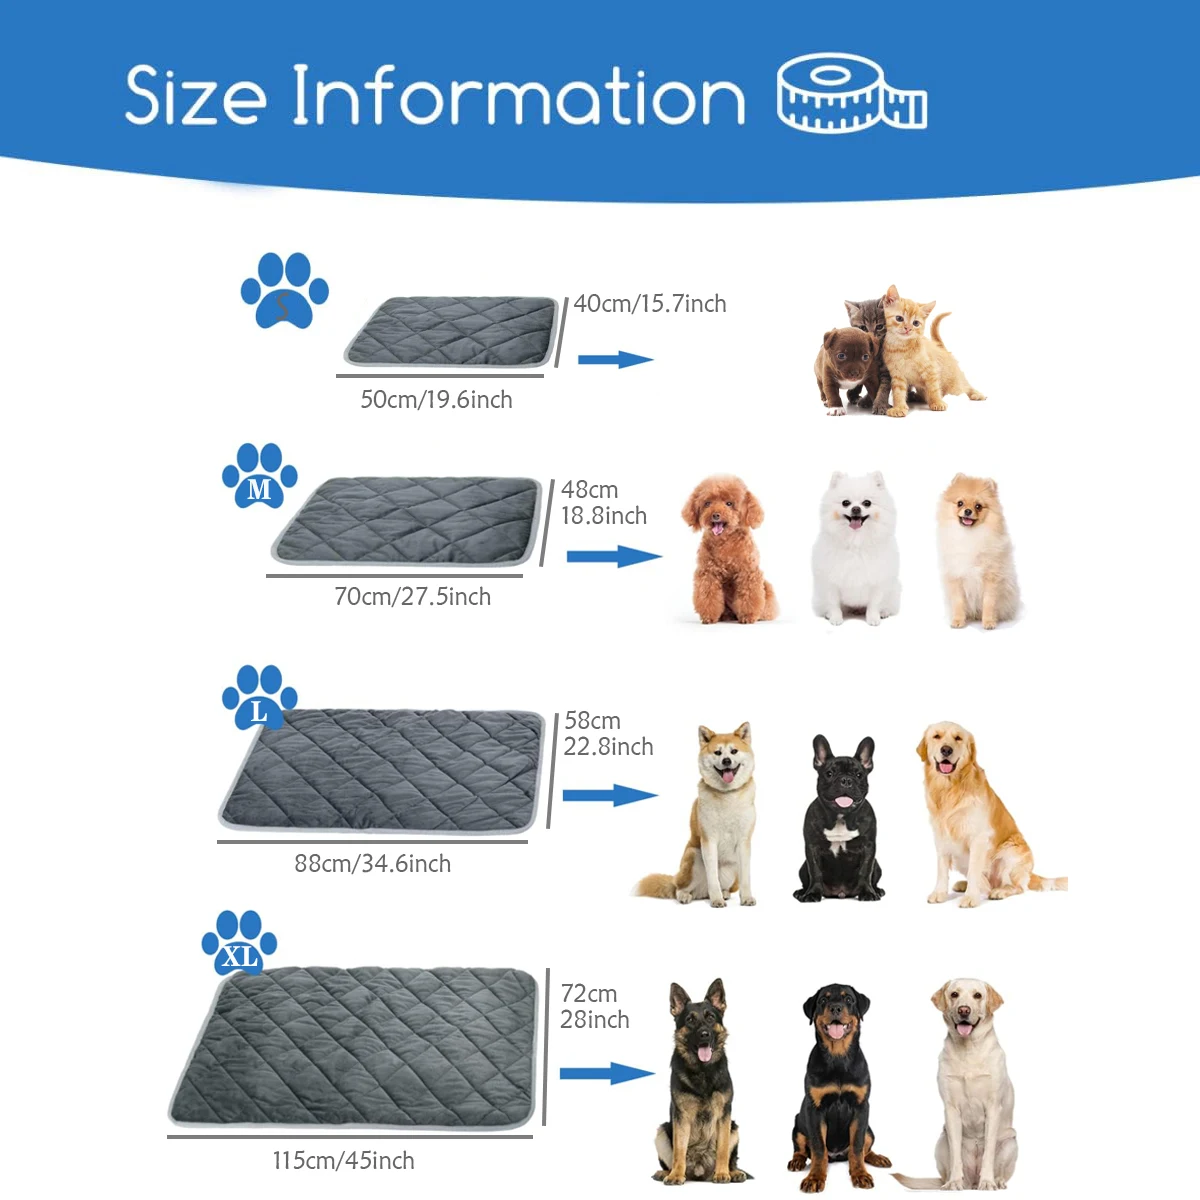 https://ae01.alicdn.com/kf/S9811b78ae97d4184a6d69a3128b56139X/Self-Warming-Pet-Mat-Extra-Warm-Thermal-Dog-Crate-Pad-Washable-Anti-Slip-Kennel-Mat-for.jpg